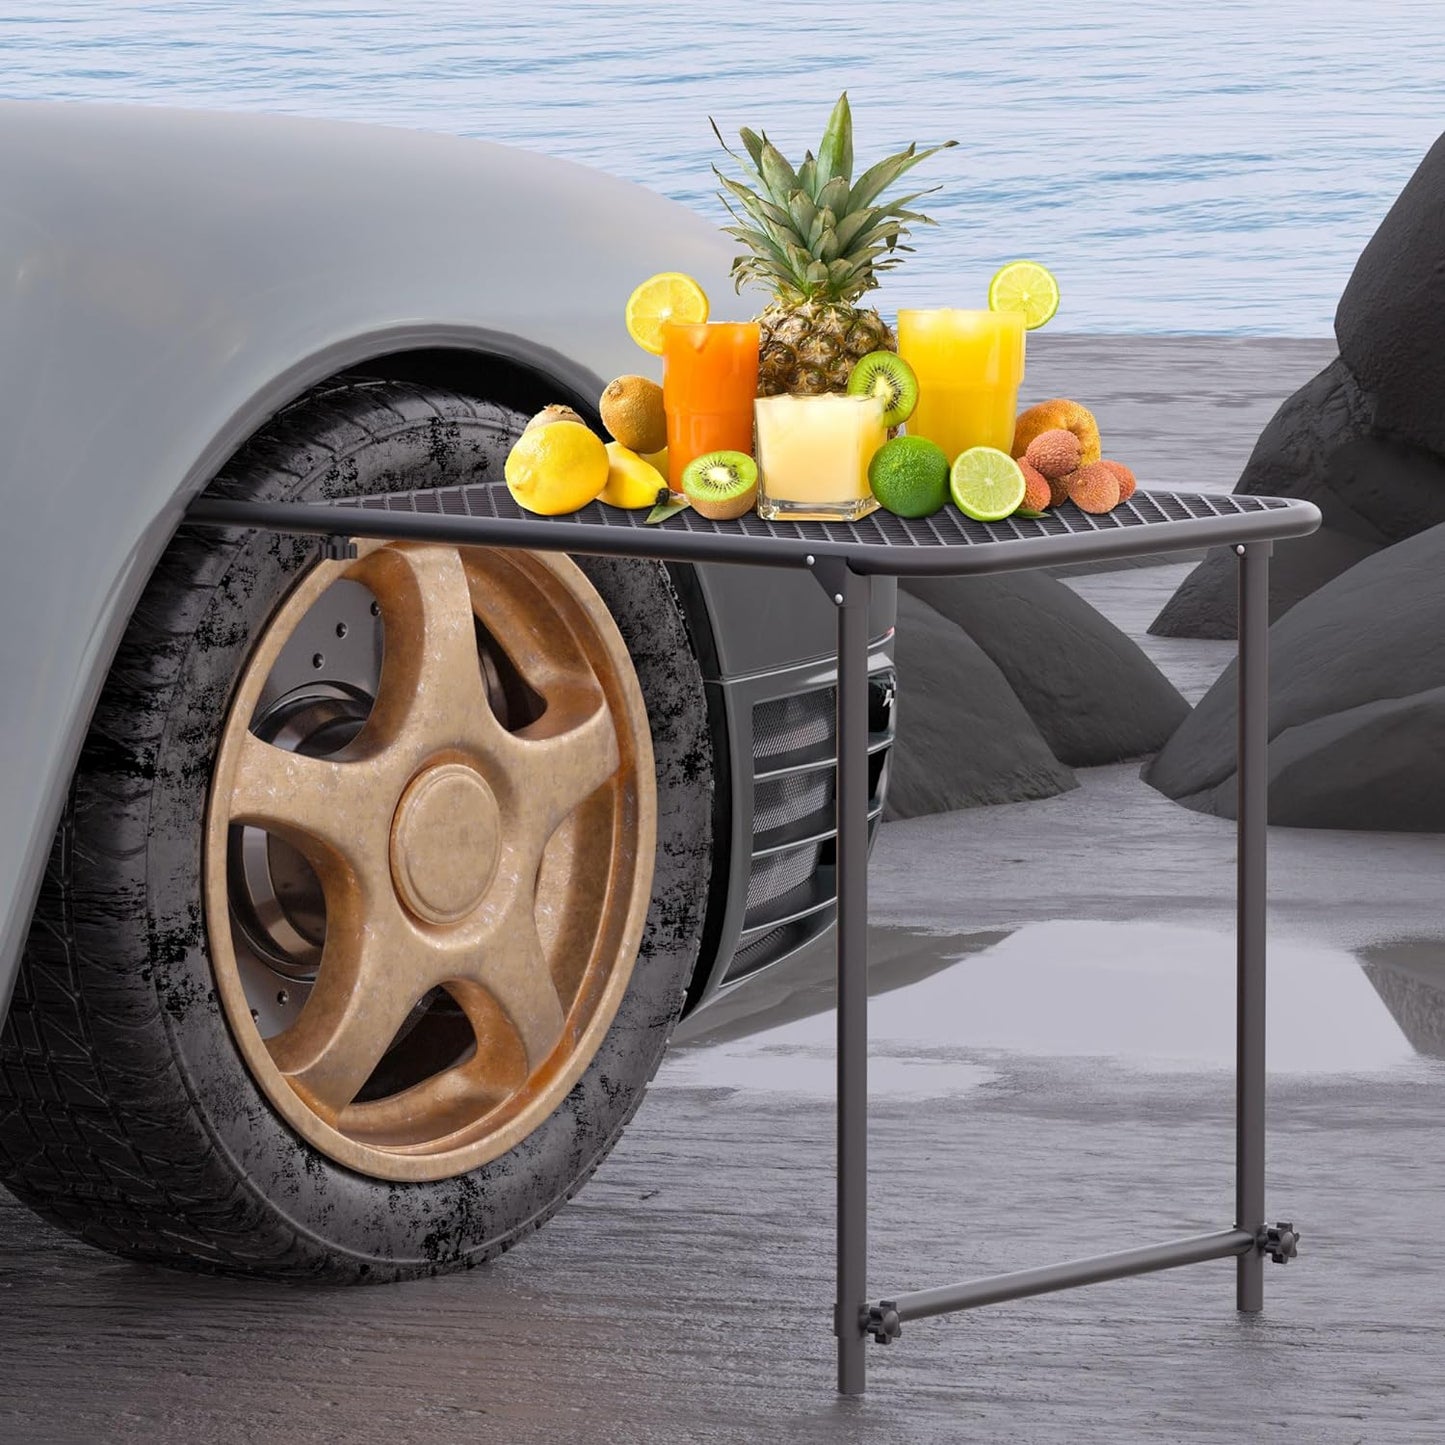 Diorssen Steel Tire Table, Adjustable,Your Essential Companion for Camping, Traveling, Tailgating and Outdoor Work, Stainless Steel for Off-Road Vehicles - Elegant Black, Large 30 x 20 x 2.9 inches